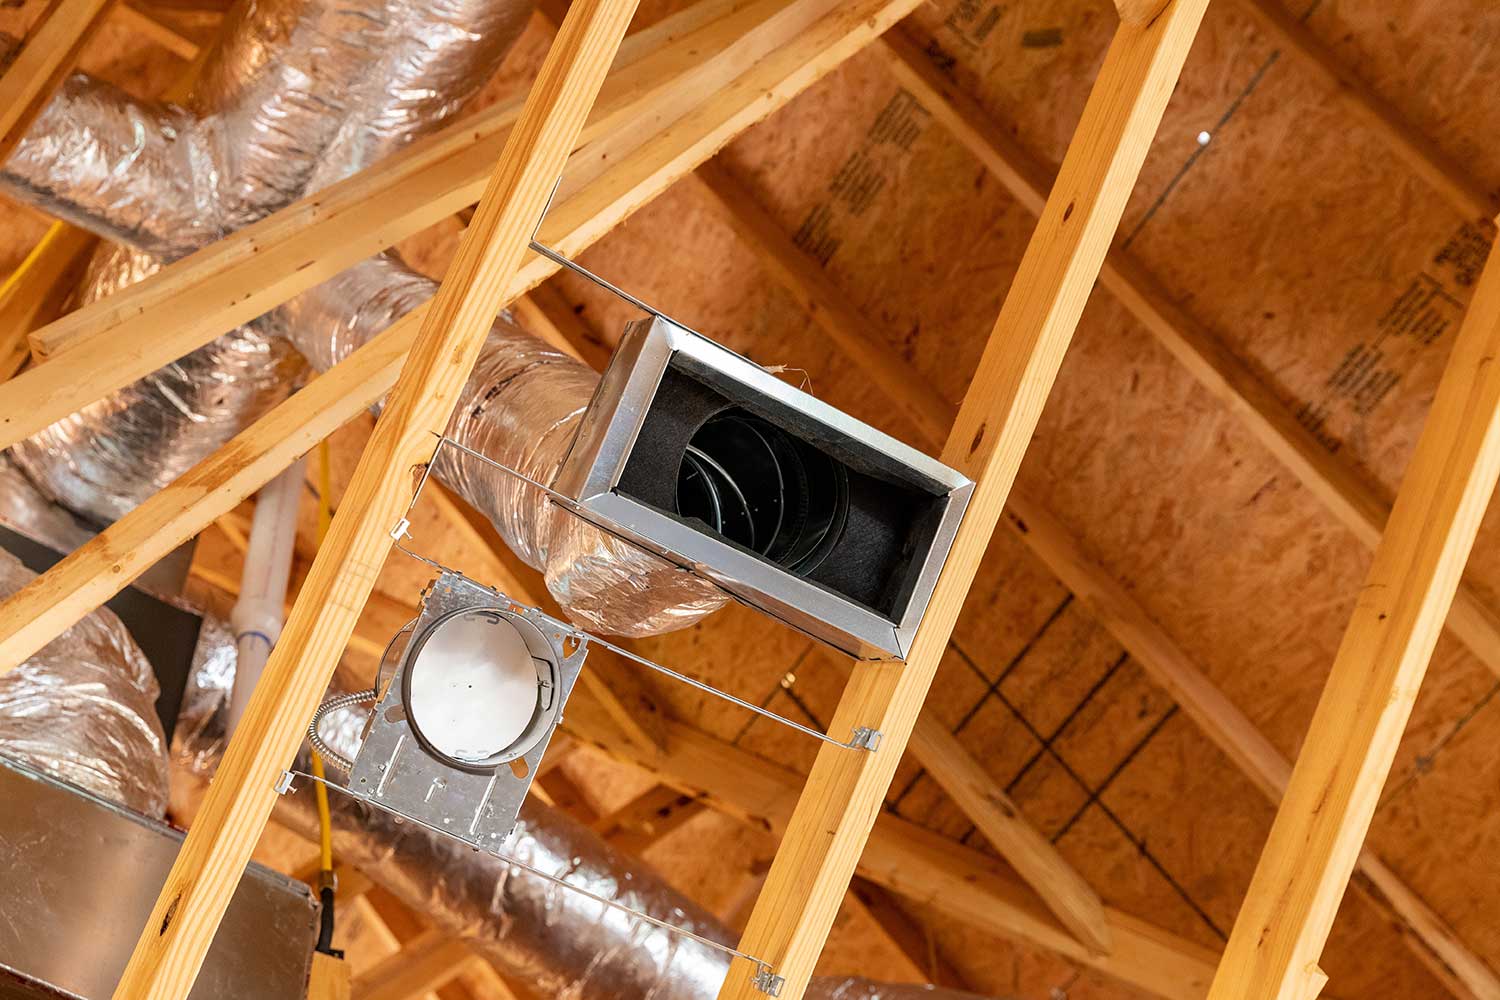 Leaky ducts are the cause of AC repair